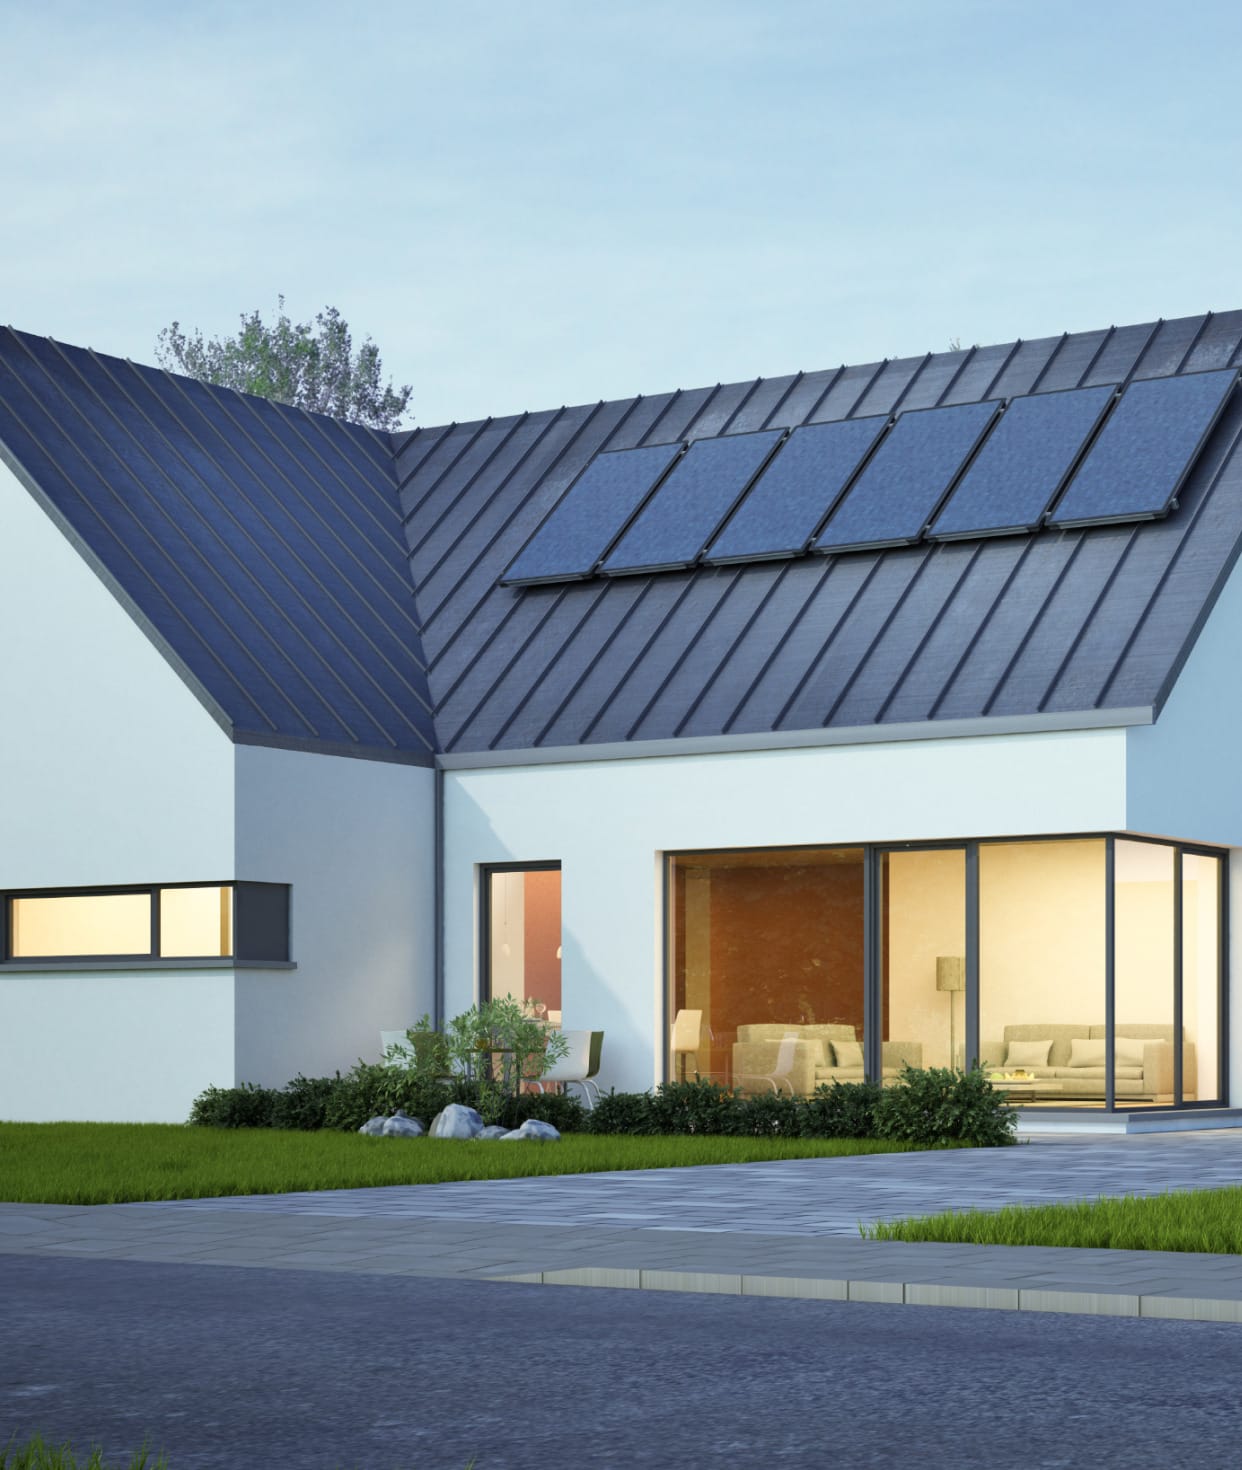 Modern contemporary house with row of solar panels on the roof